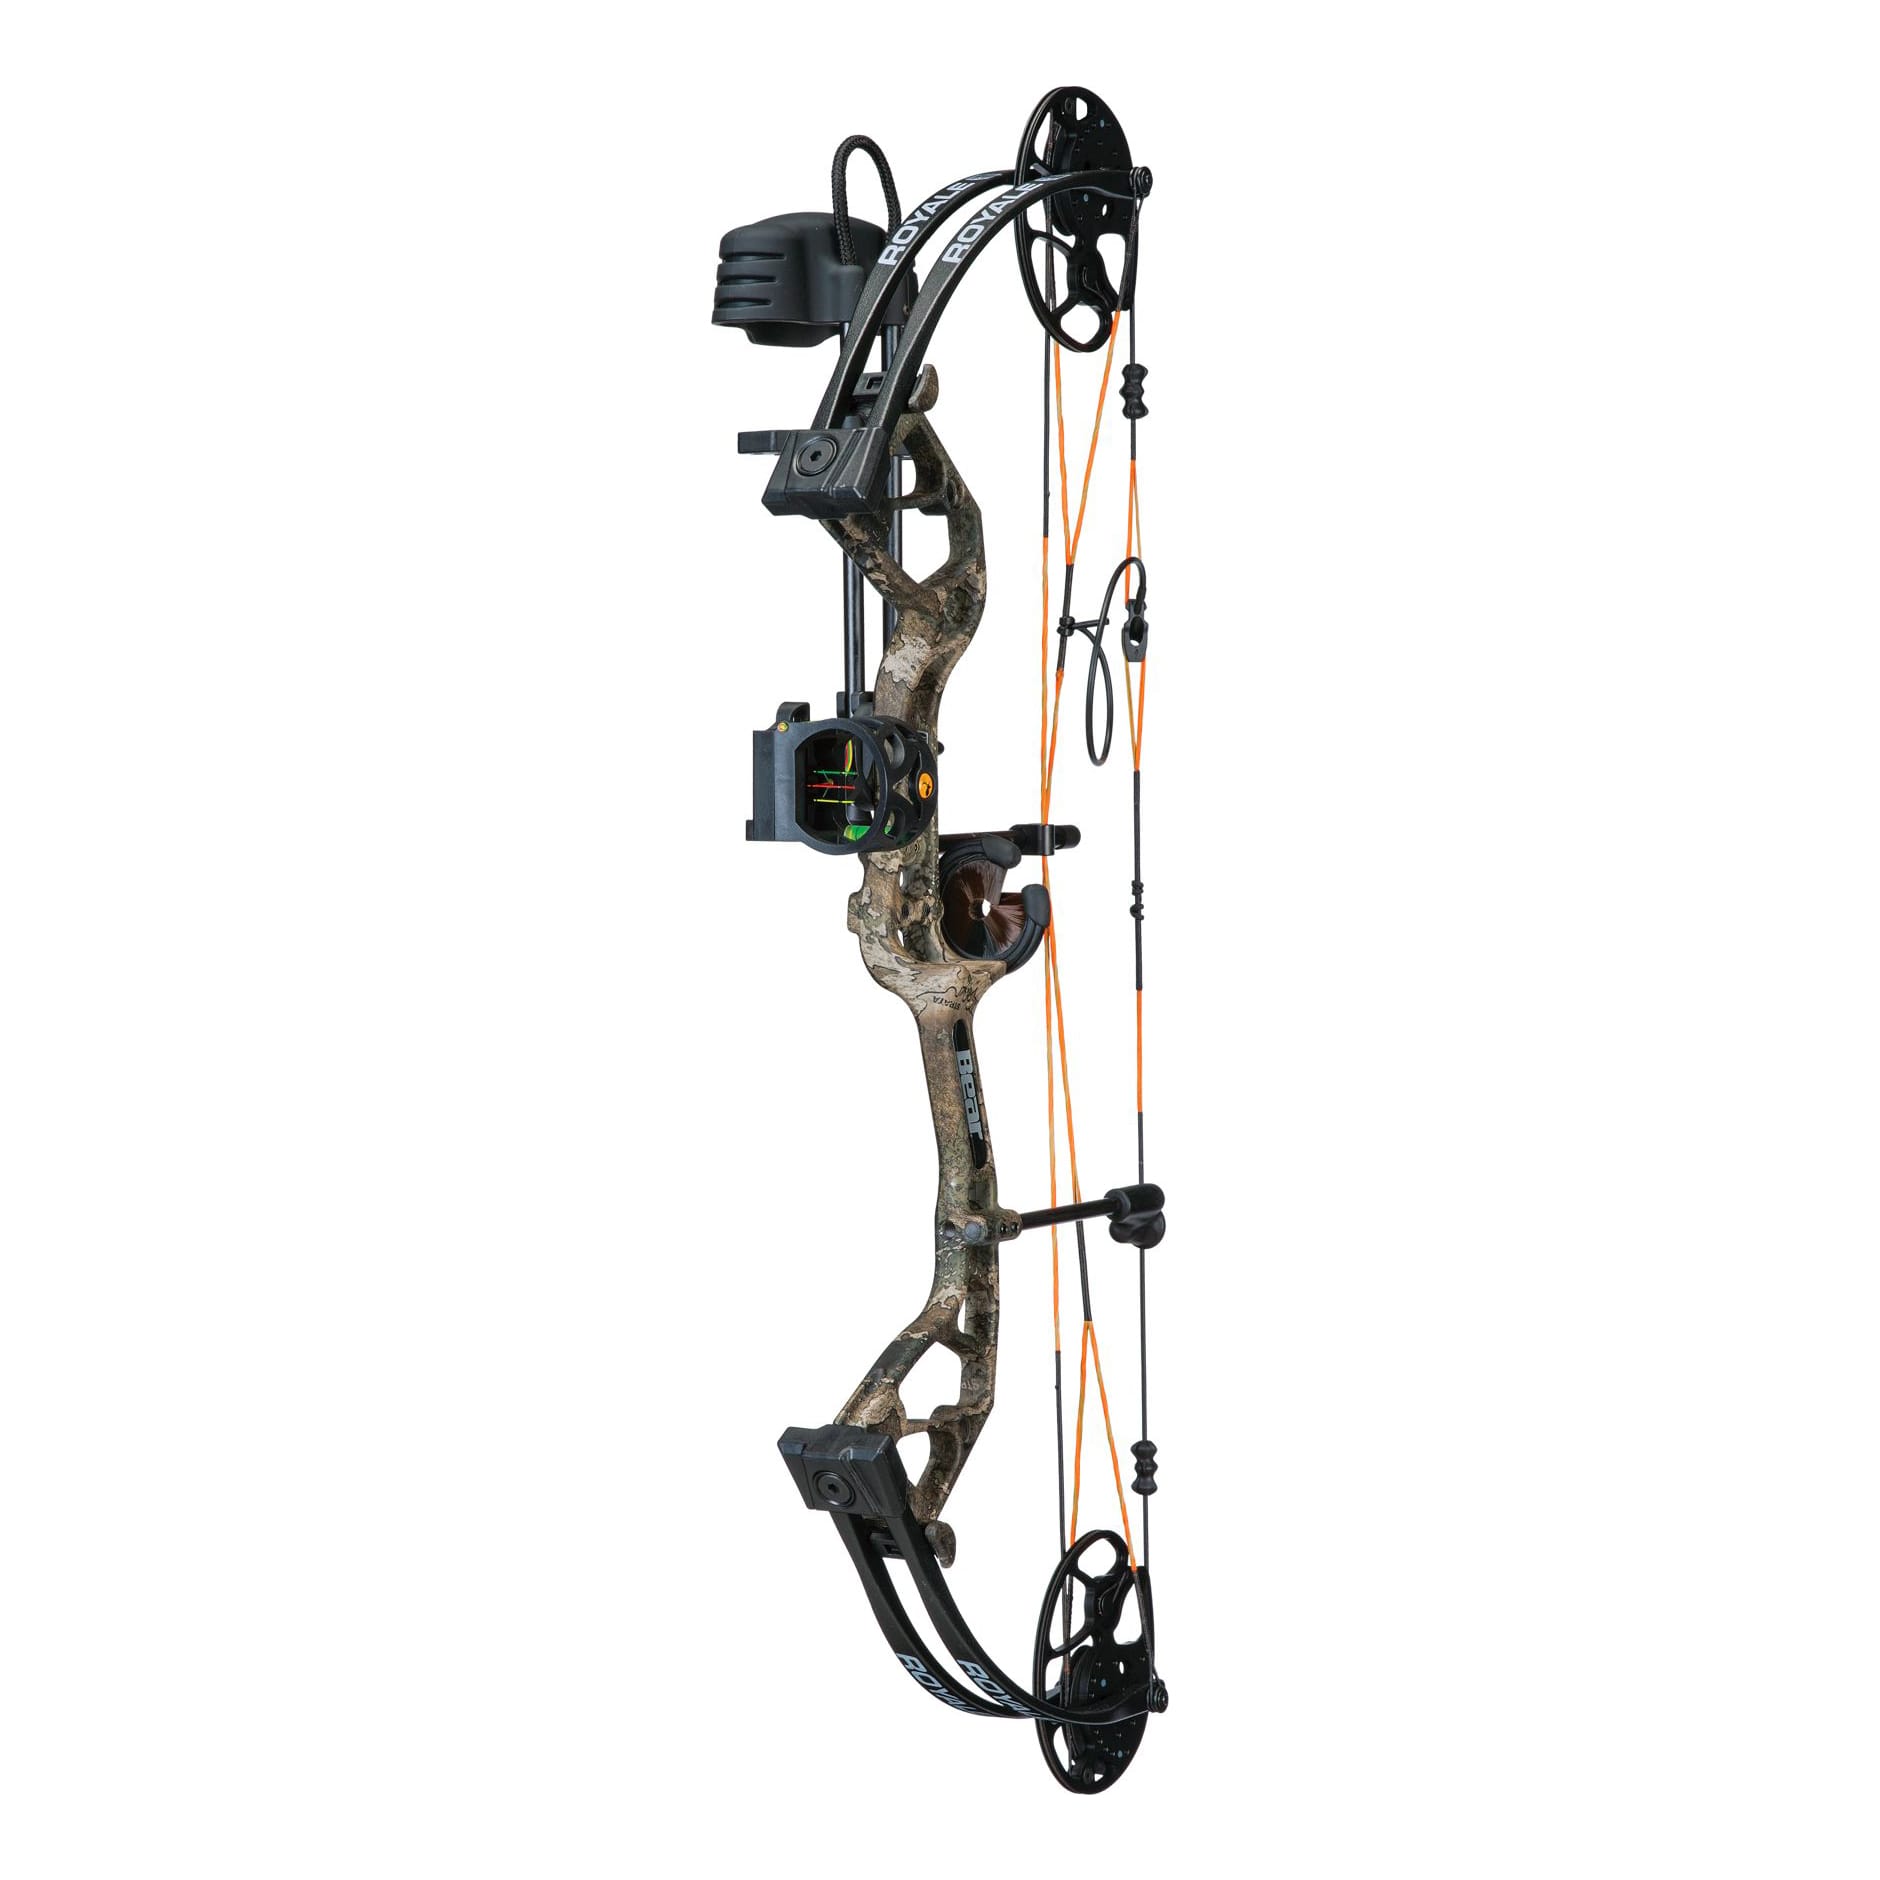 Bear® Archery Royale RTH Compound Bow Package - TrueTimber Strata,Bear® Archery Royale RTH Compound Bow Package - TrueTimber Strata